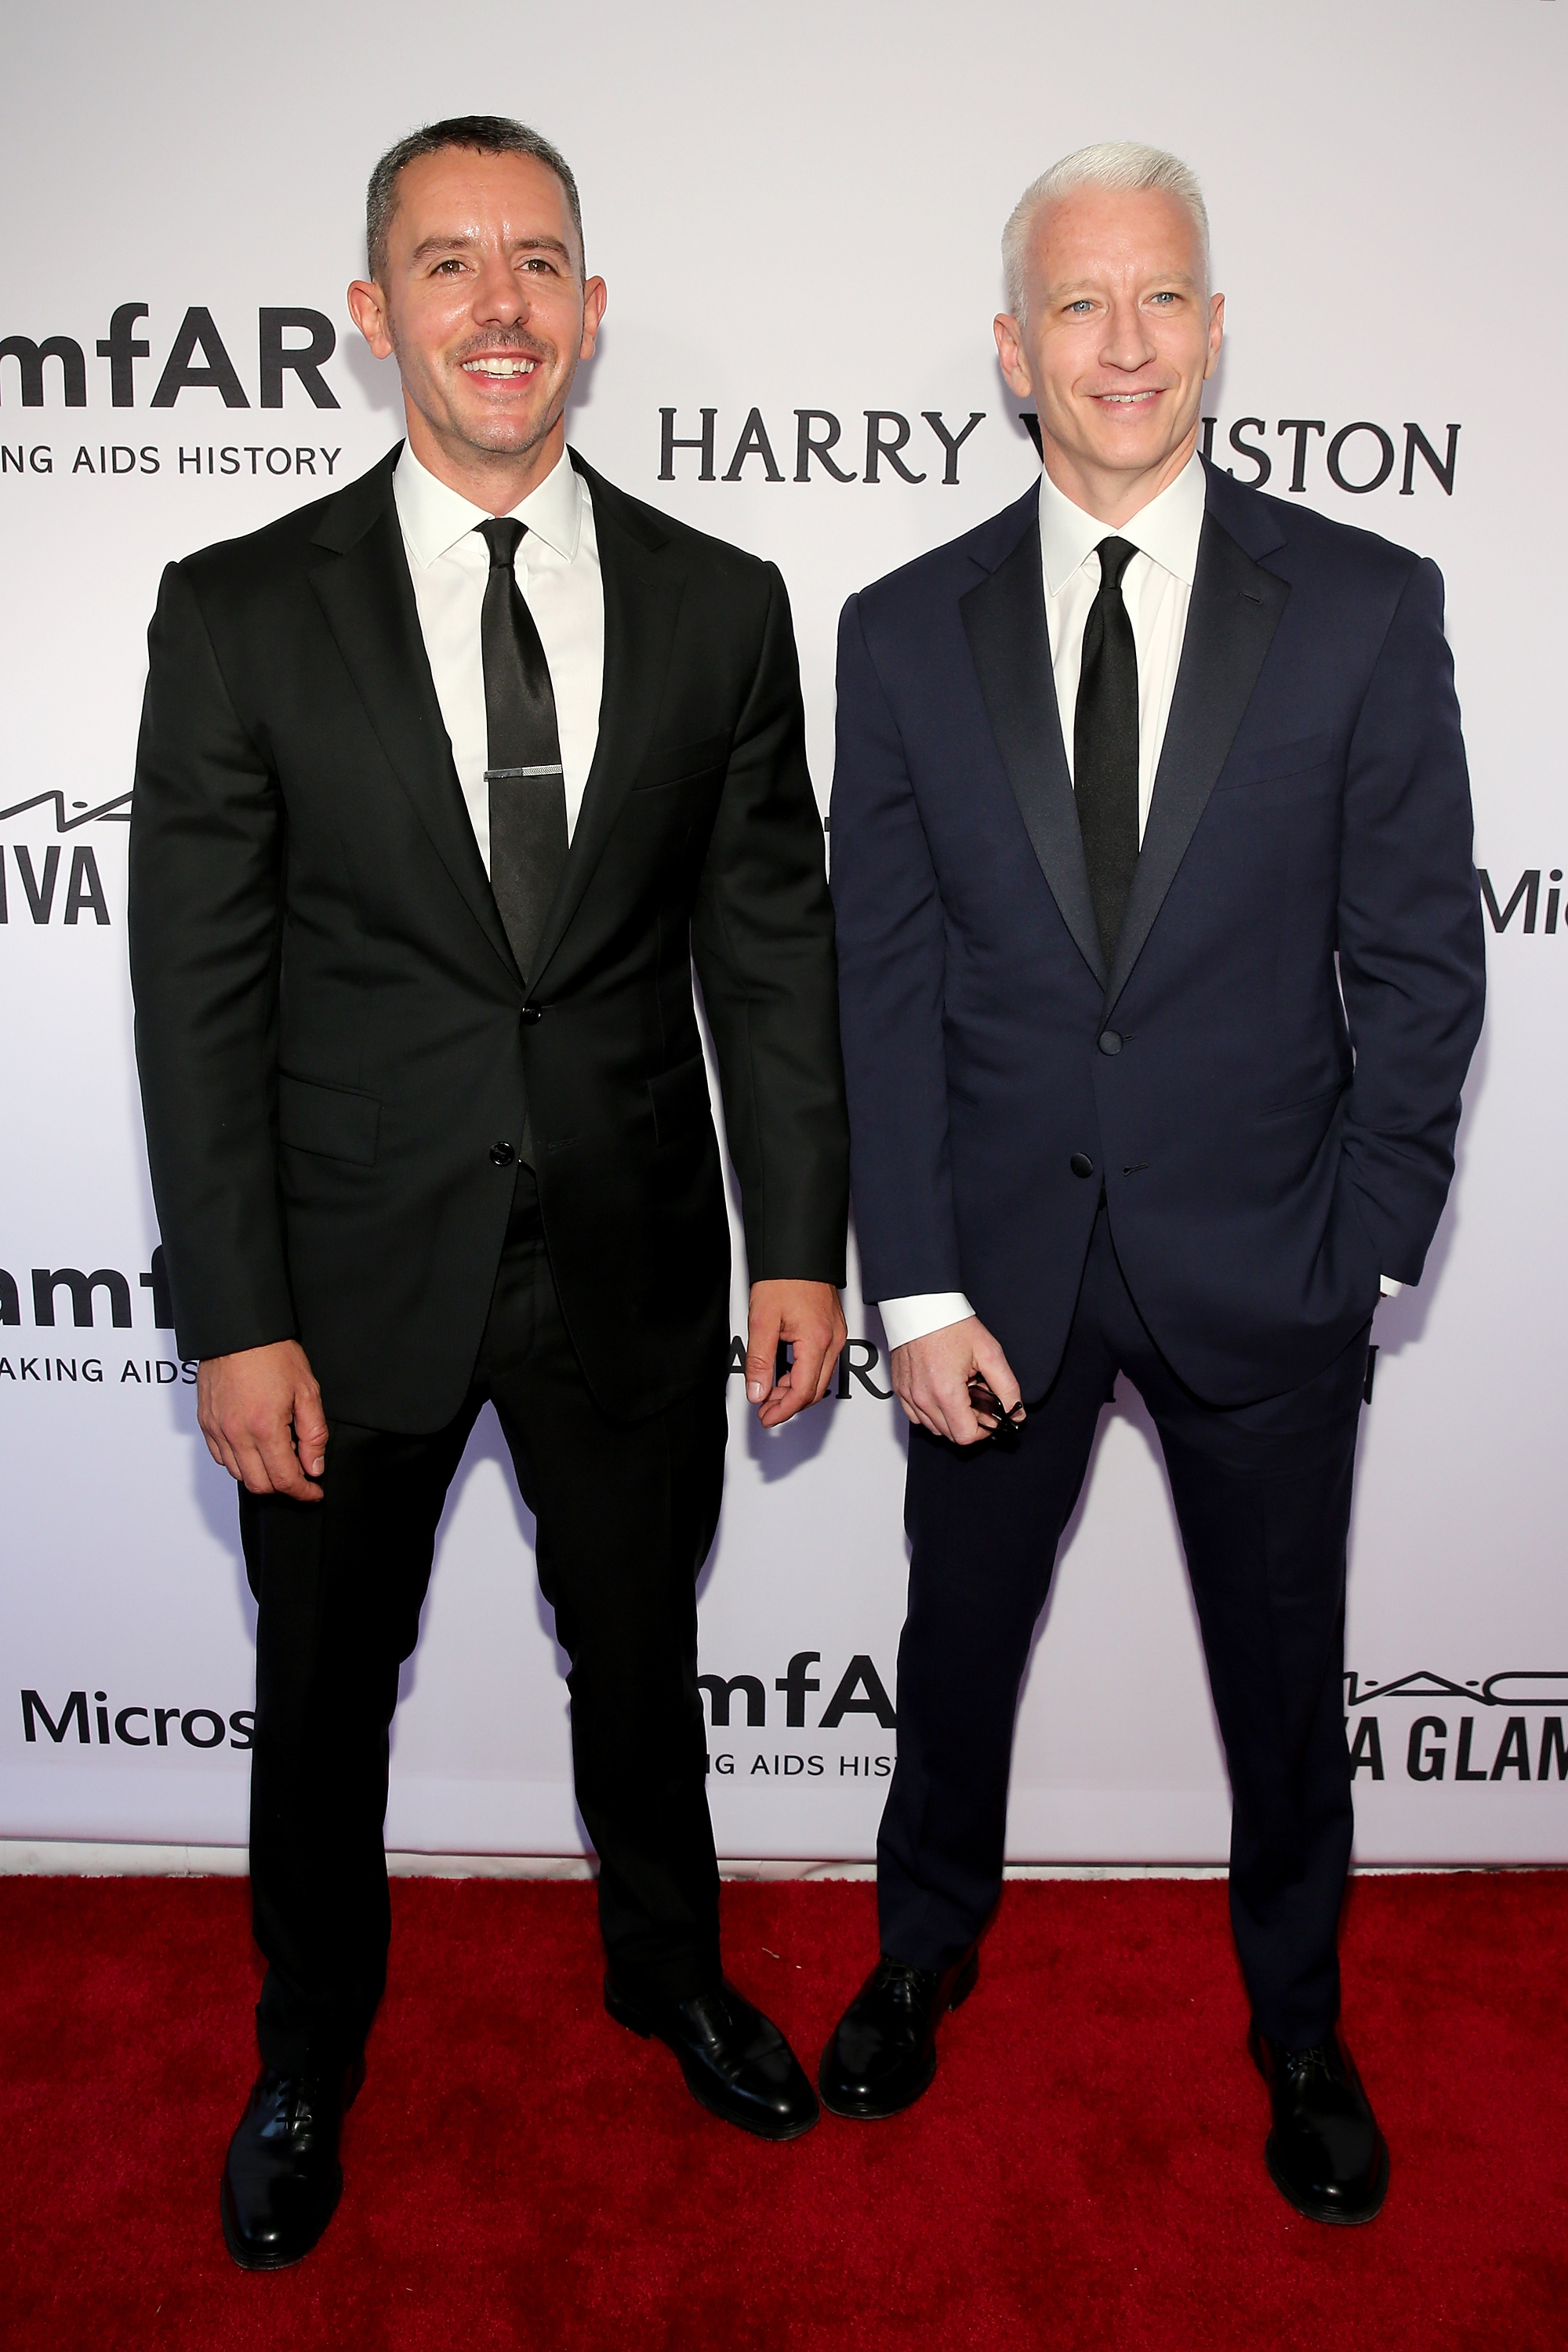 Benjamin and Anderson in suits and ties on the red carpet